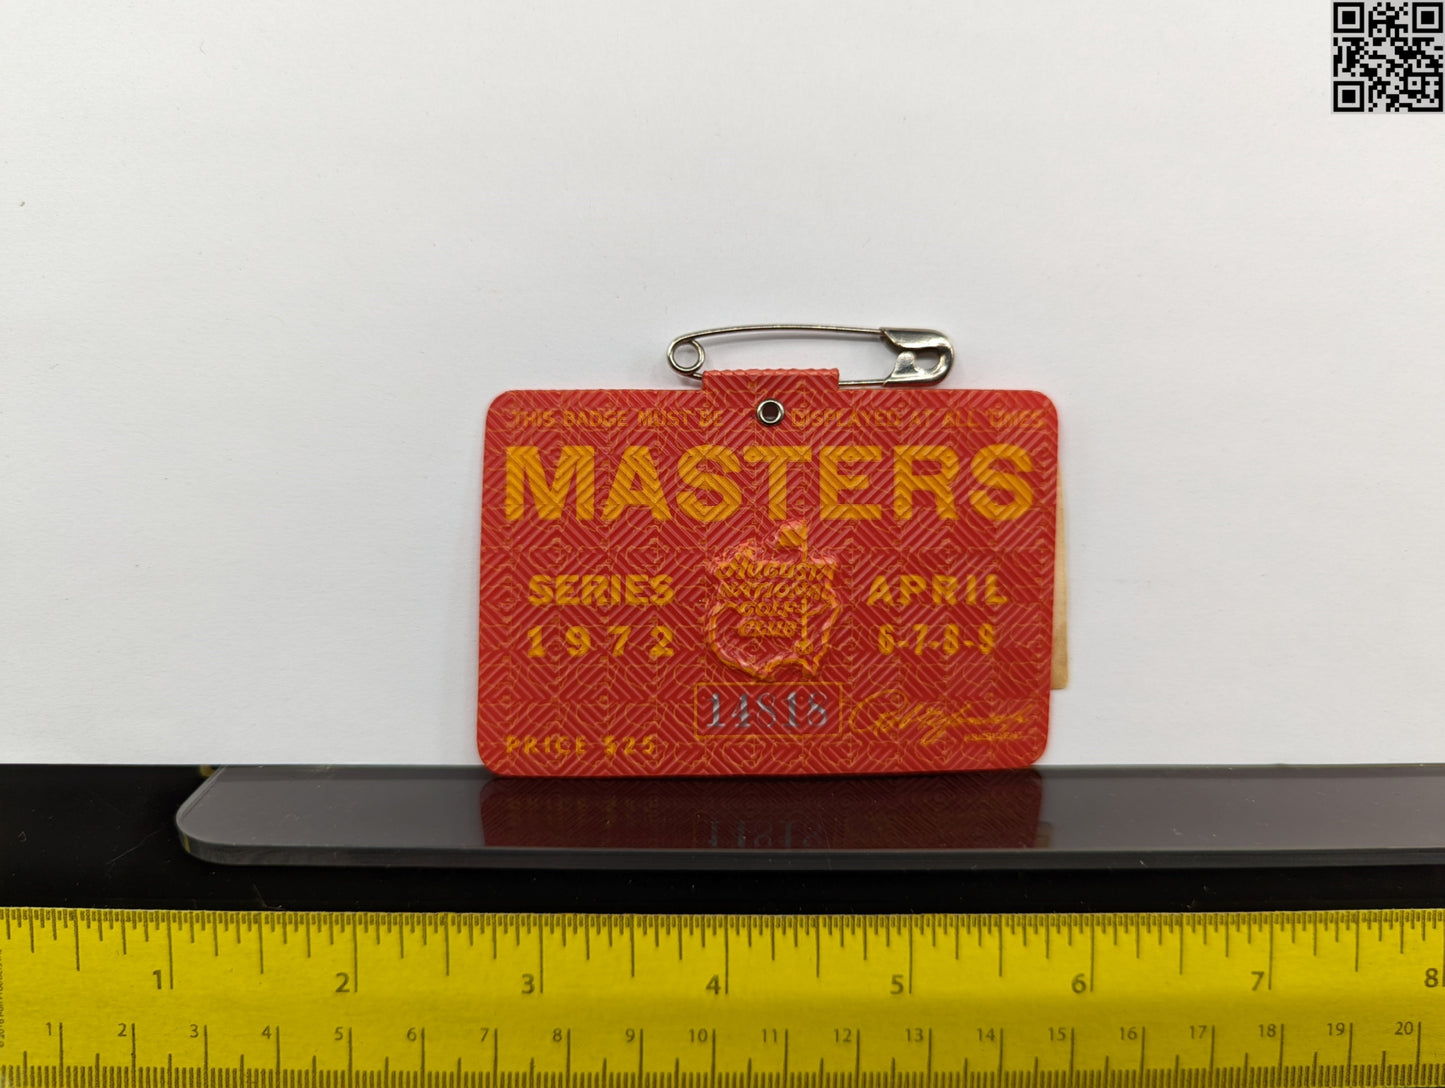 1972 Masters Tournament Series Badge - Augusta National Golf Club - Jack Nicklaus Win